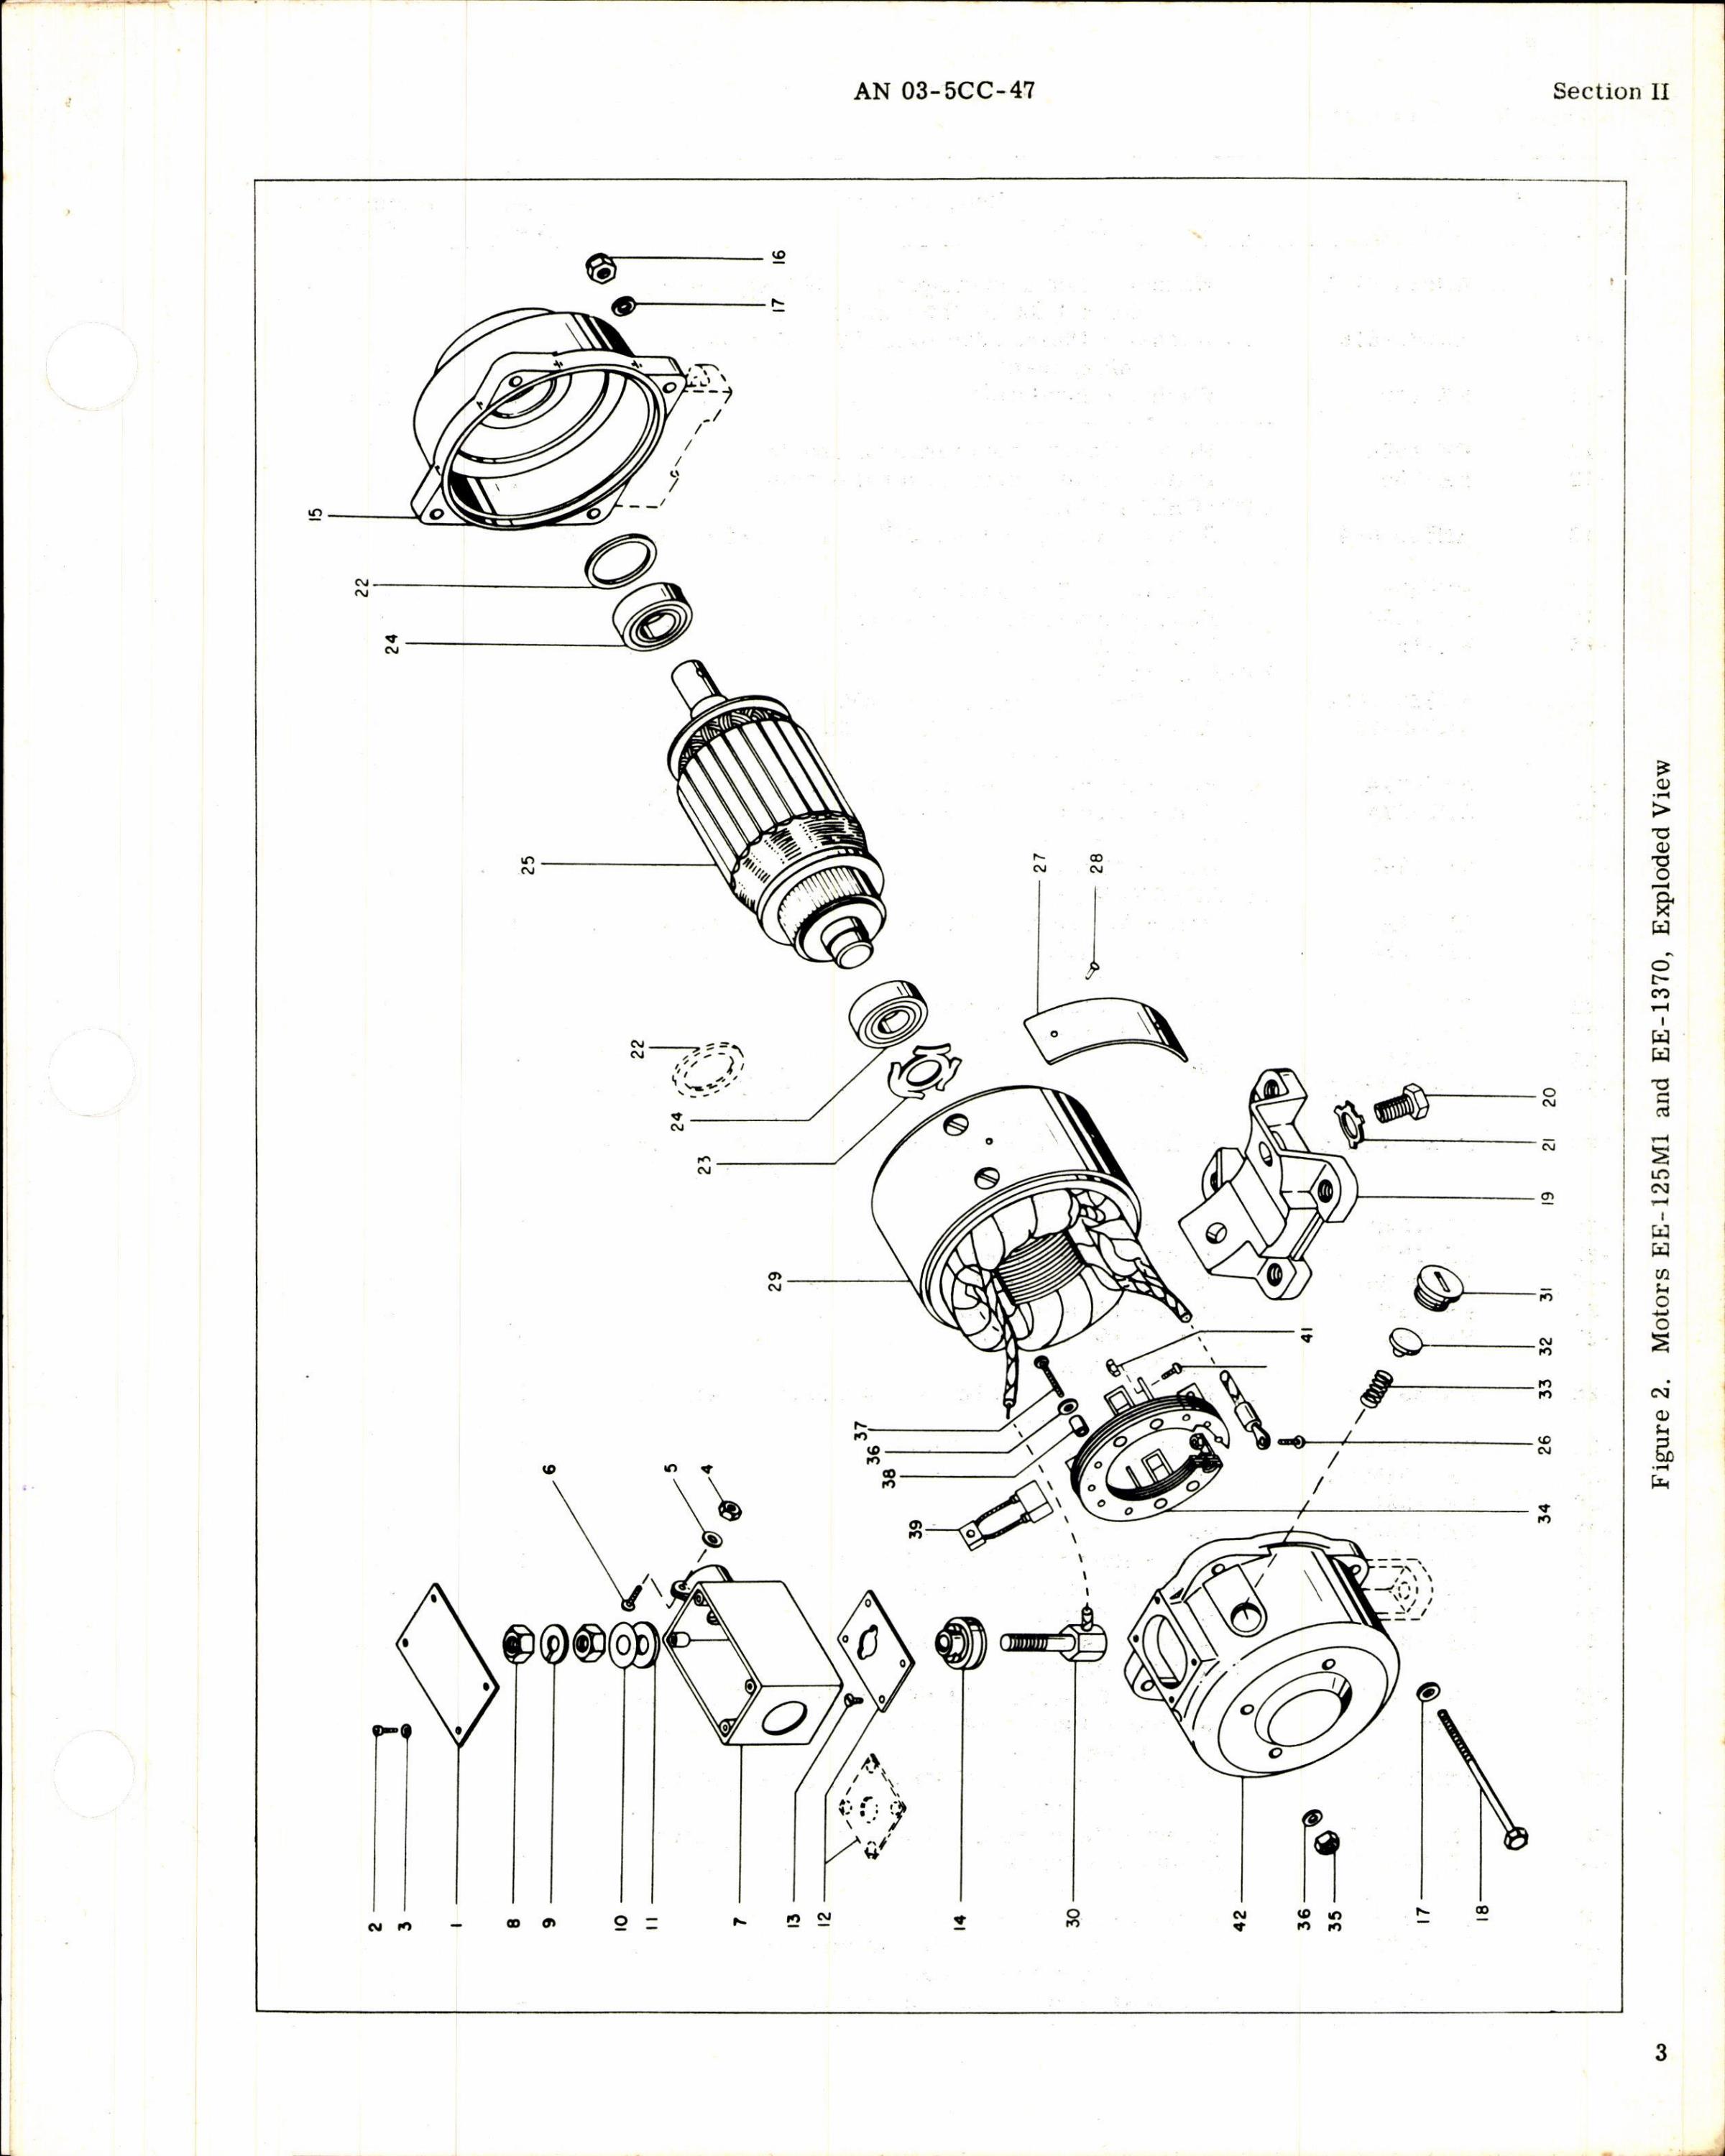 Sample page 3 from AirCorps Library document: Parts Catalog for Air Associates Electric Motors